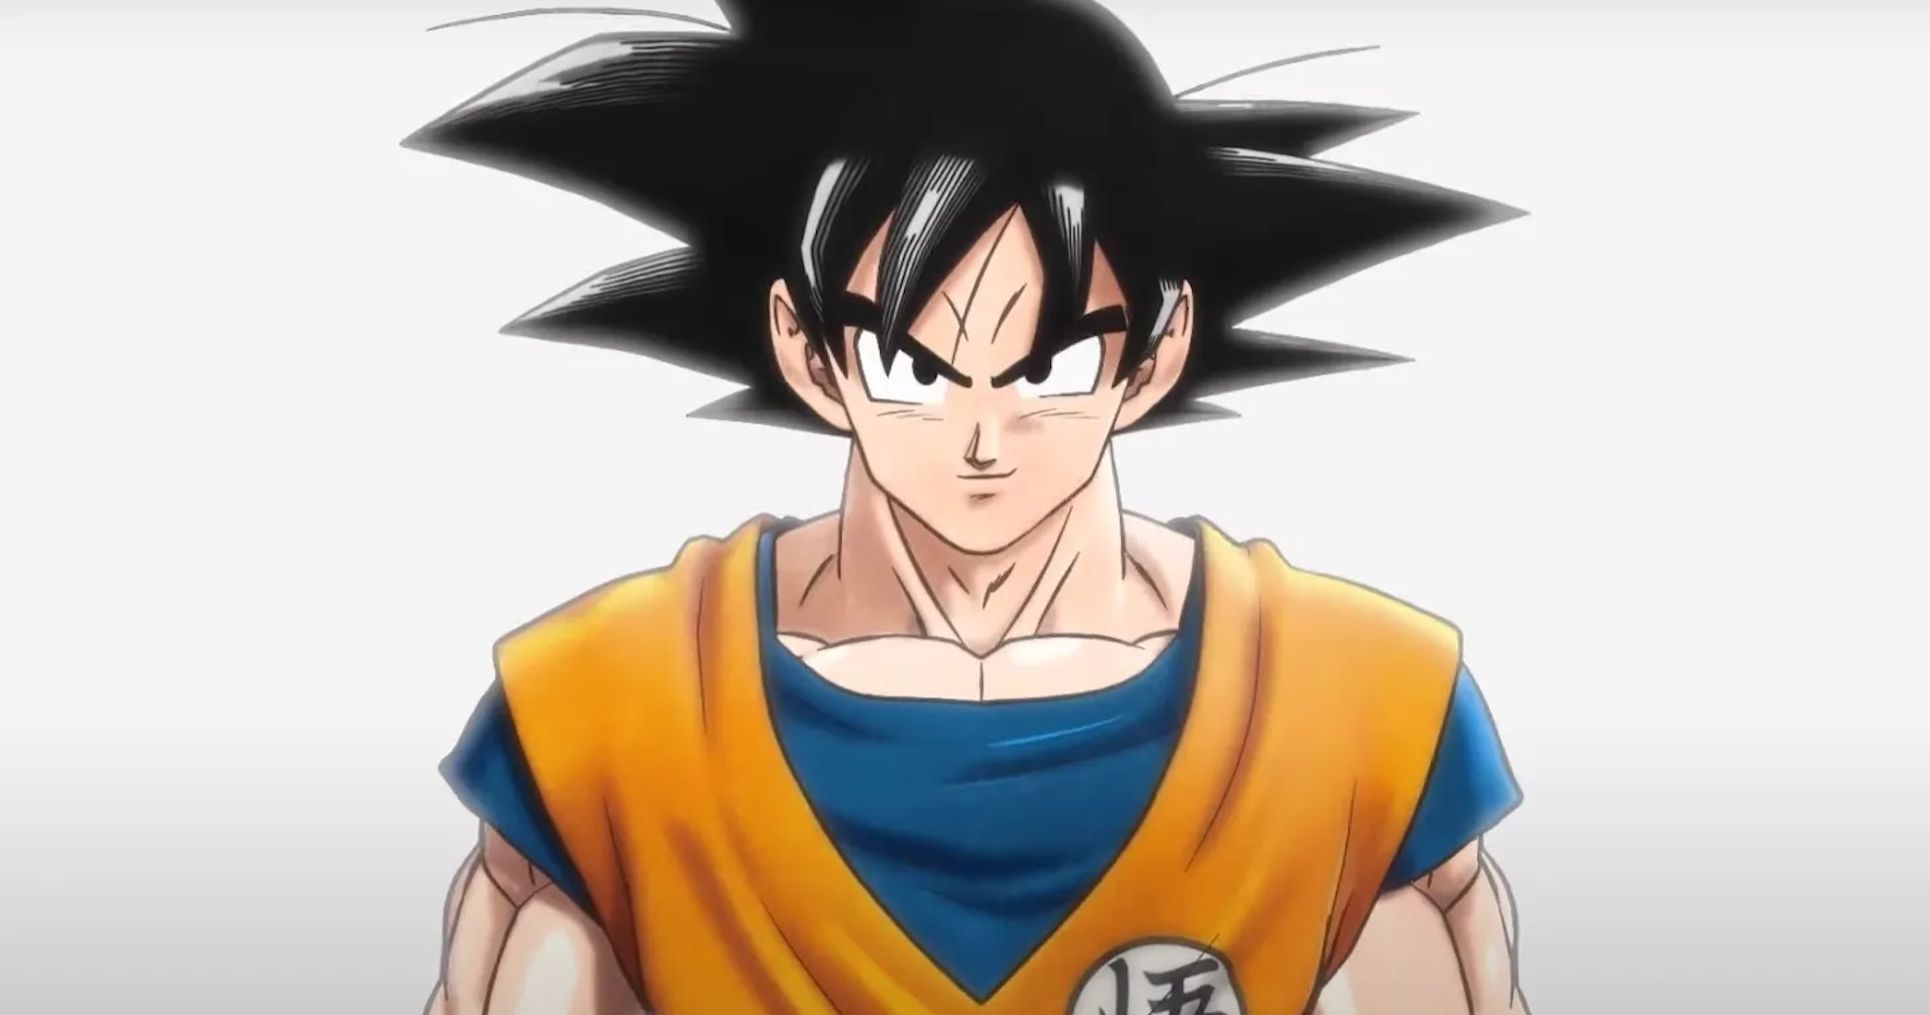 New Dragon Ball Super Movie Title, Character Designs and Visuals Revealed at Comic-Con@Home